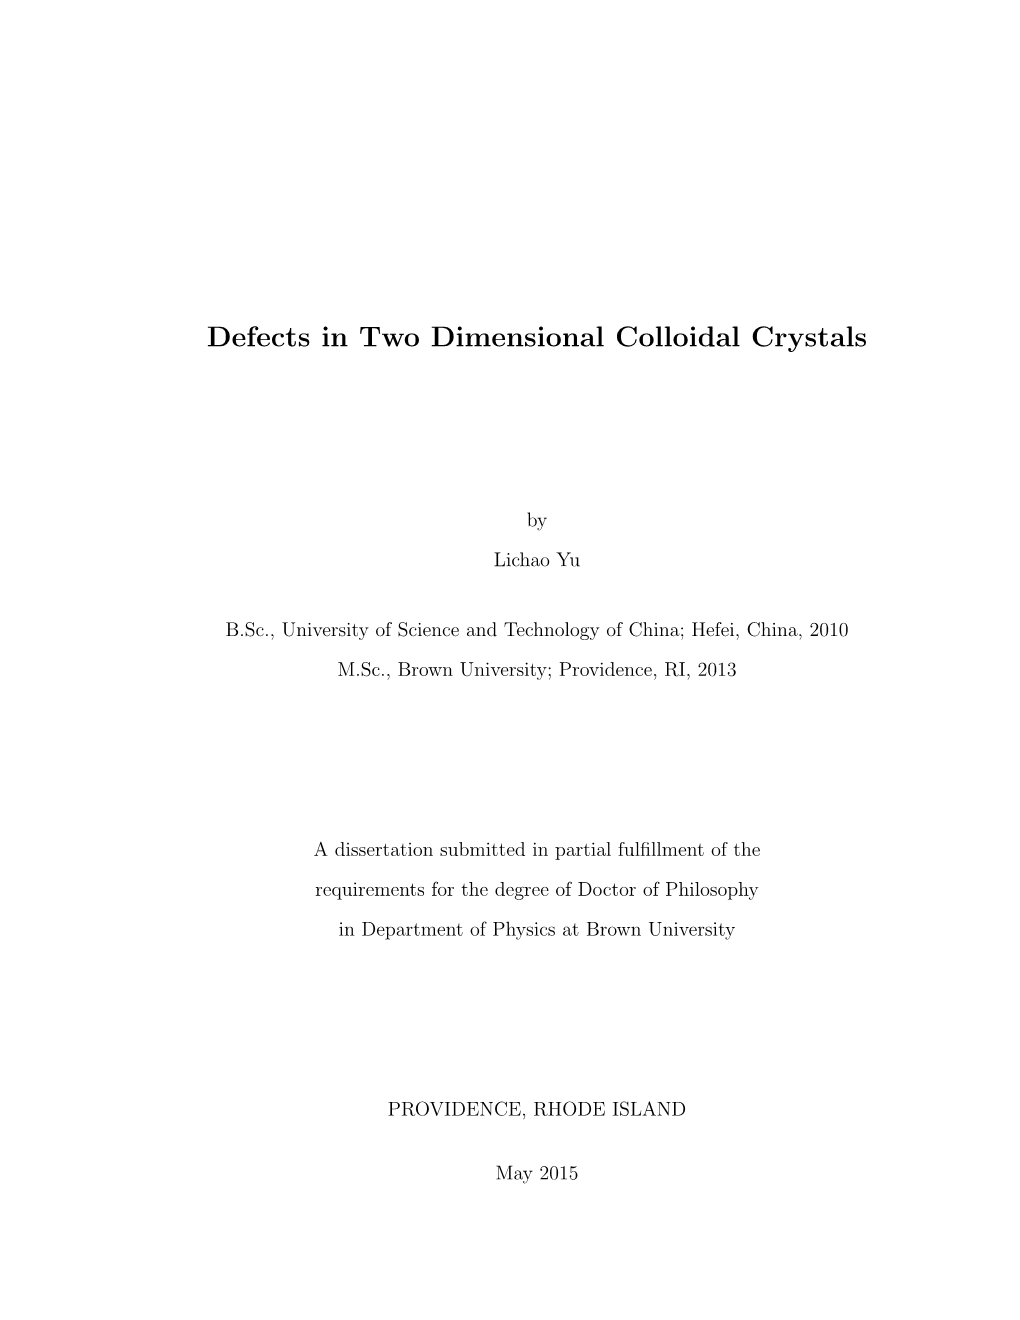 Defects in Two Dimensional Colloidal Crystals